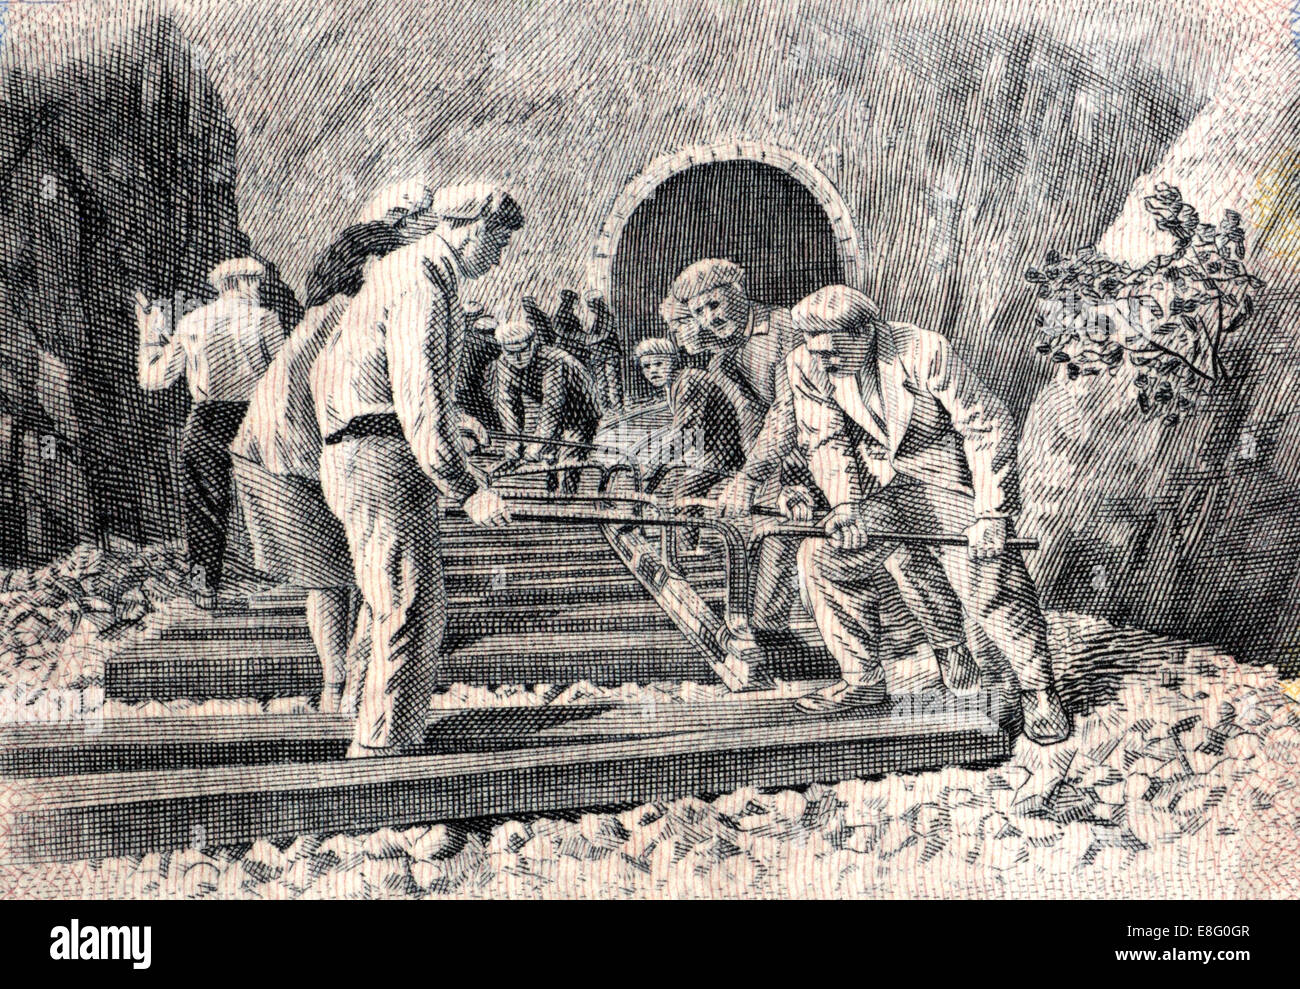 Detail from a 1950s Bulgarian 25 Lev banknote showing men laying railway track Stock Photo